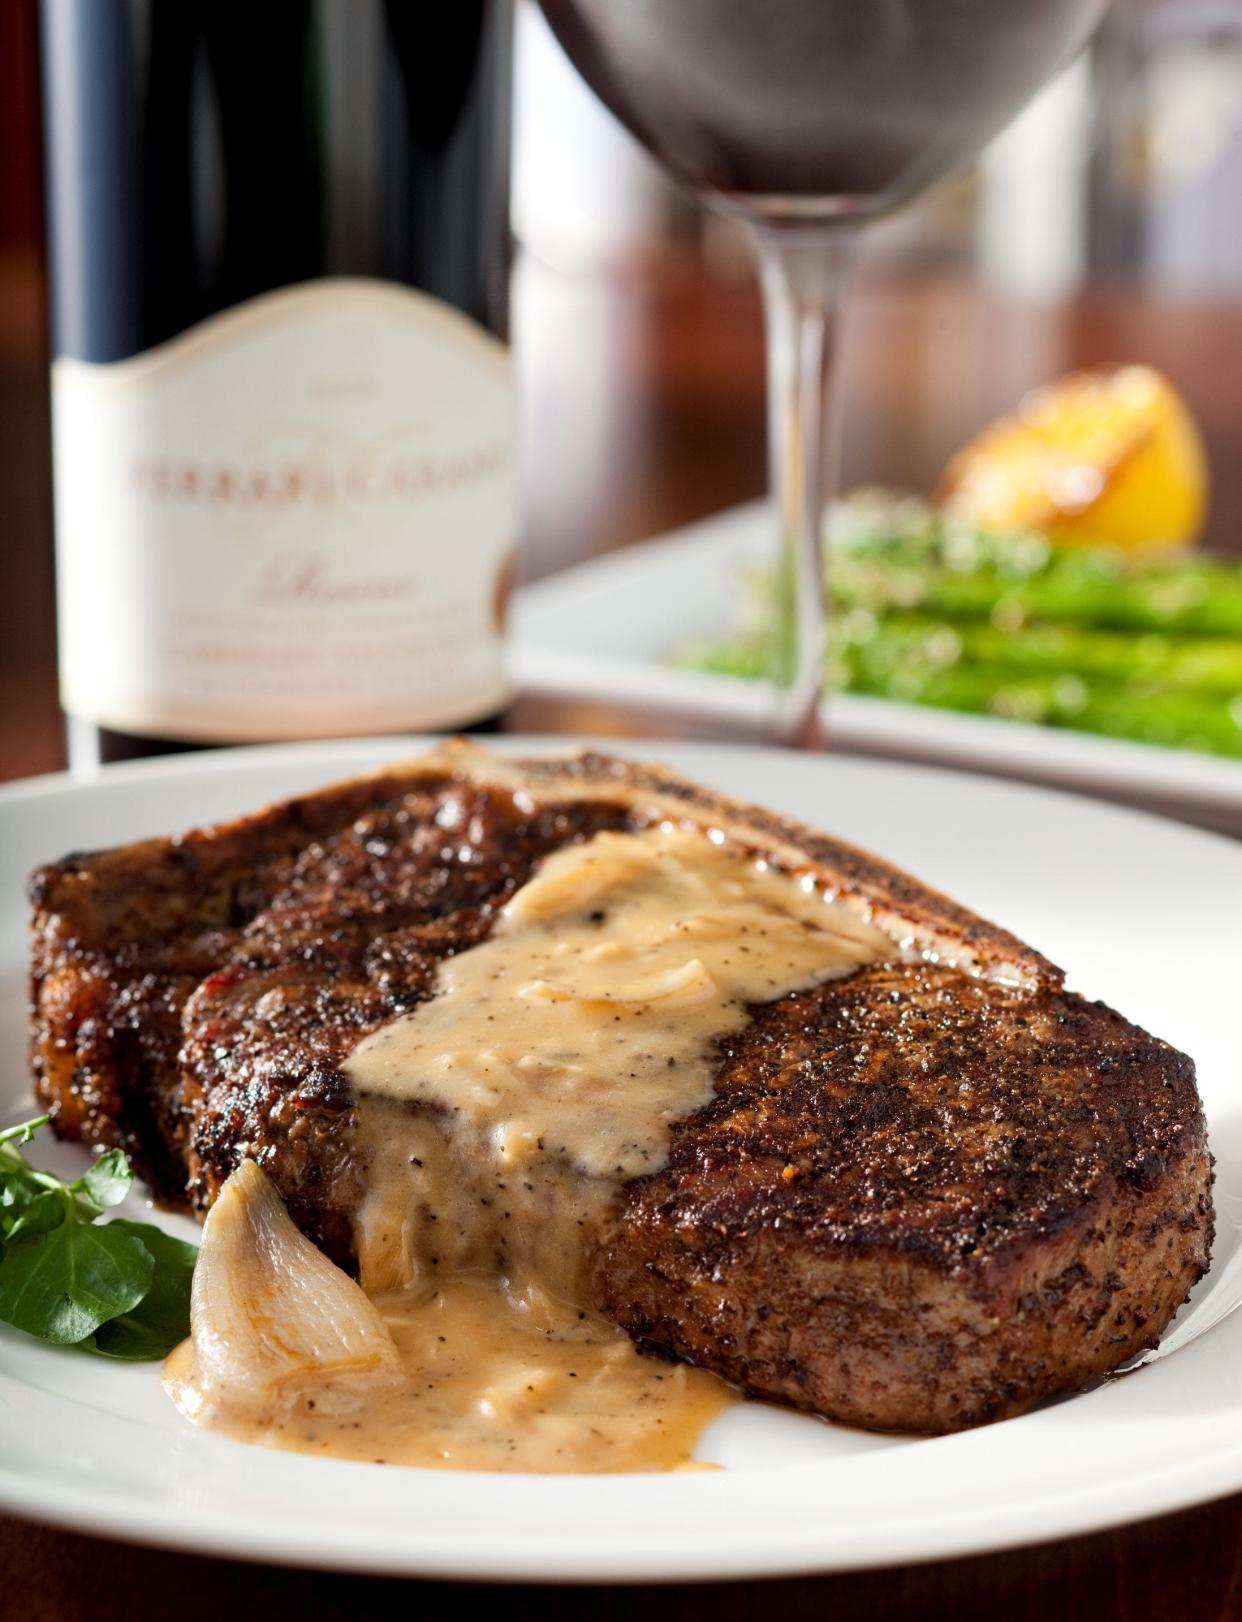 The bone-in Kona-crusted dry-aged sirloin at the Capital Grille is topped with shallot butter.